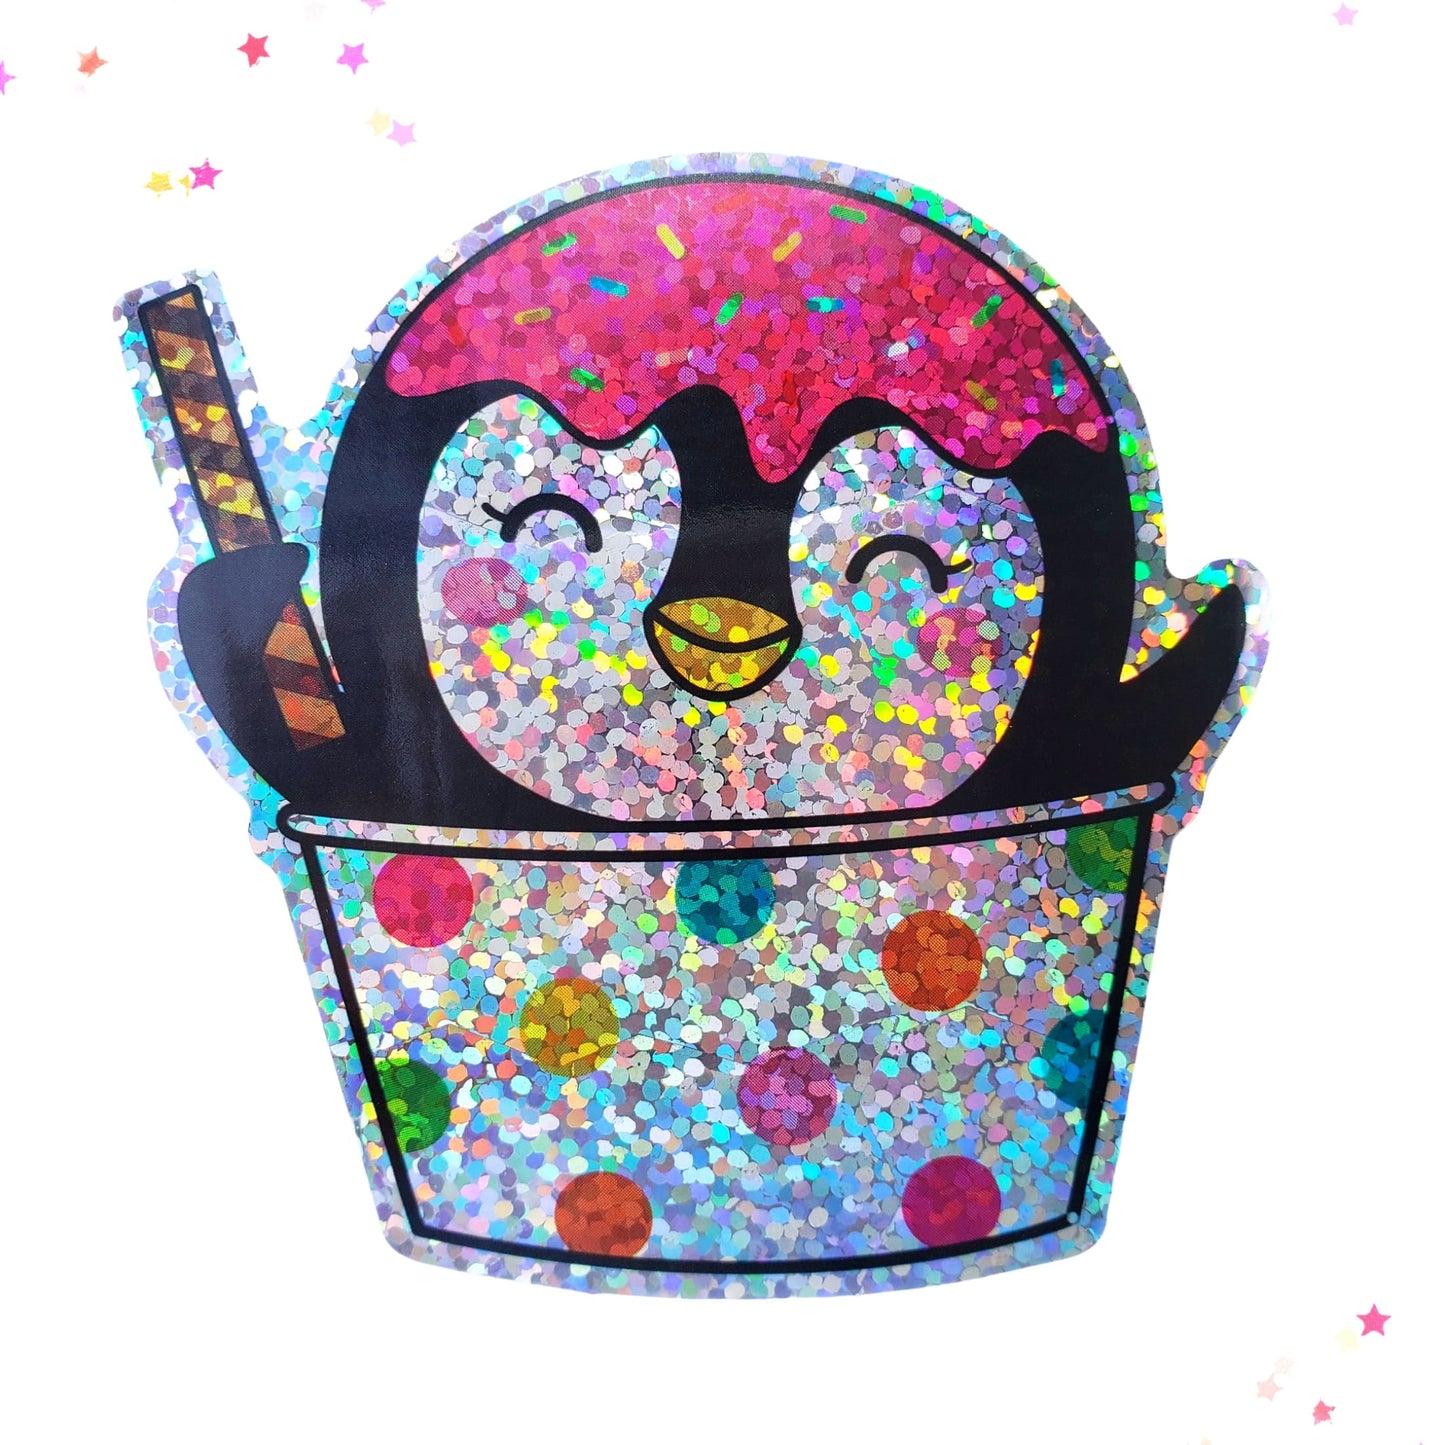 Premium Sticker - Sparkly Holographic Glitter Penguin in a Sundae Cup from Confetti Kitty, Only 2.00